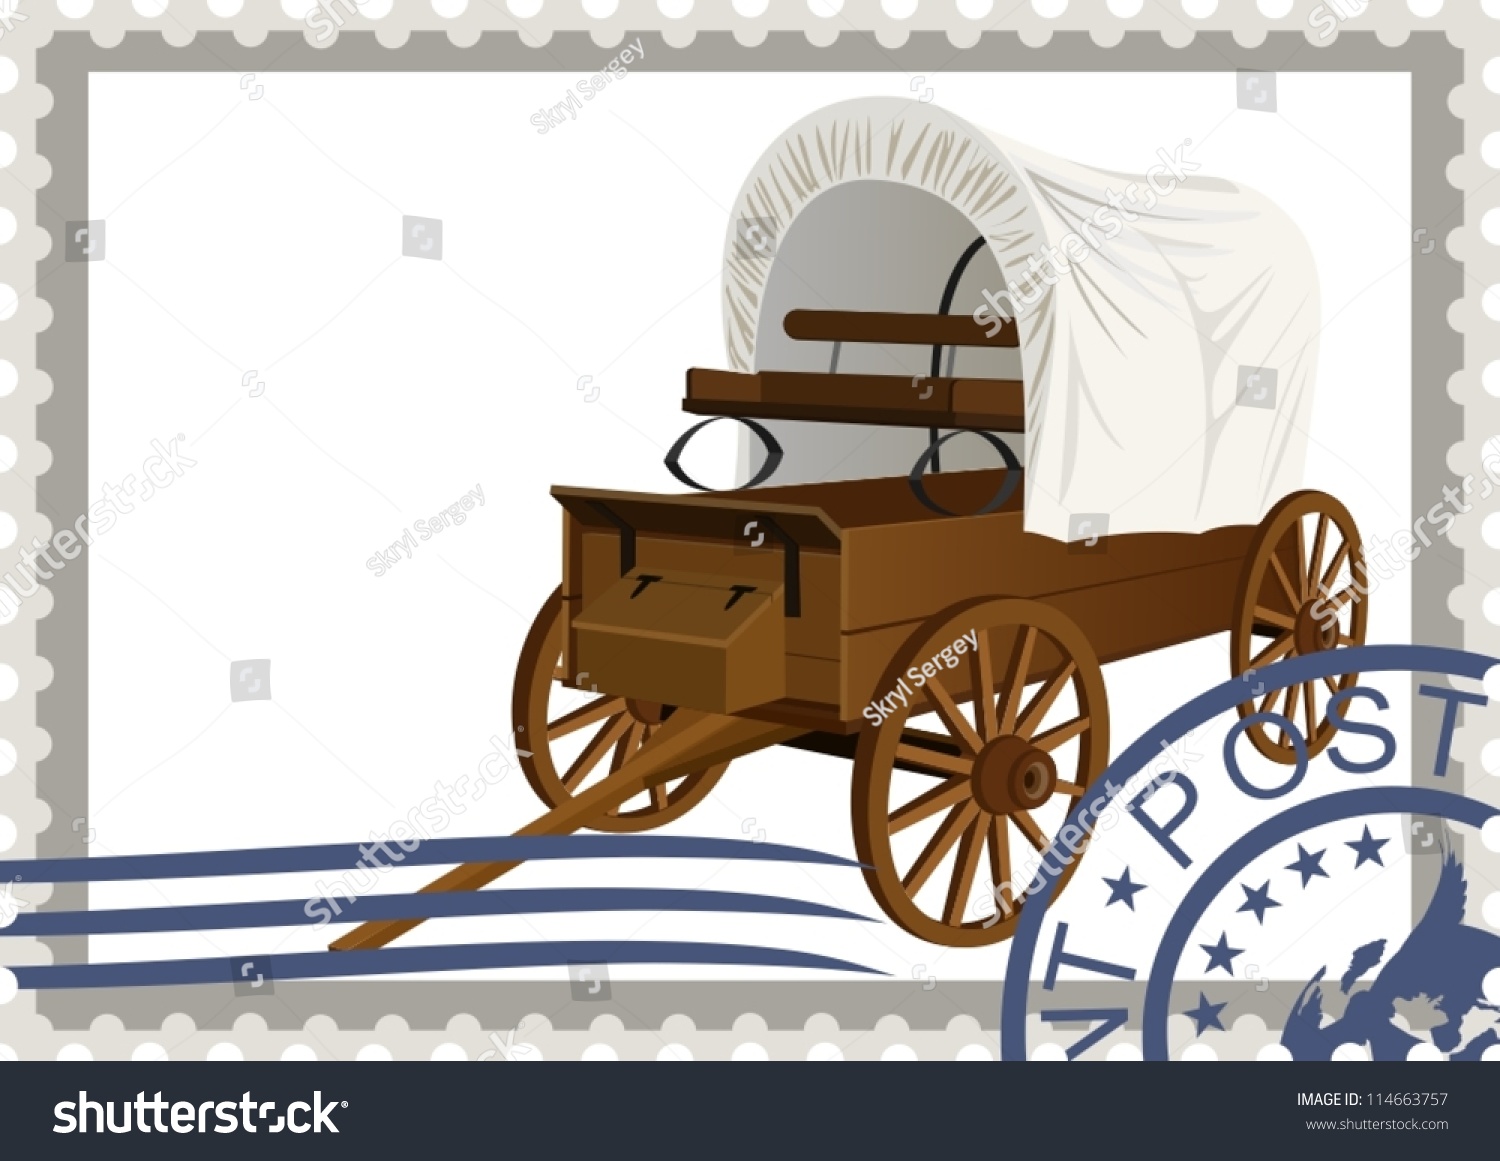 SVG of The illustration on a postage stamp. An old covered wagon svg